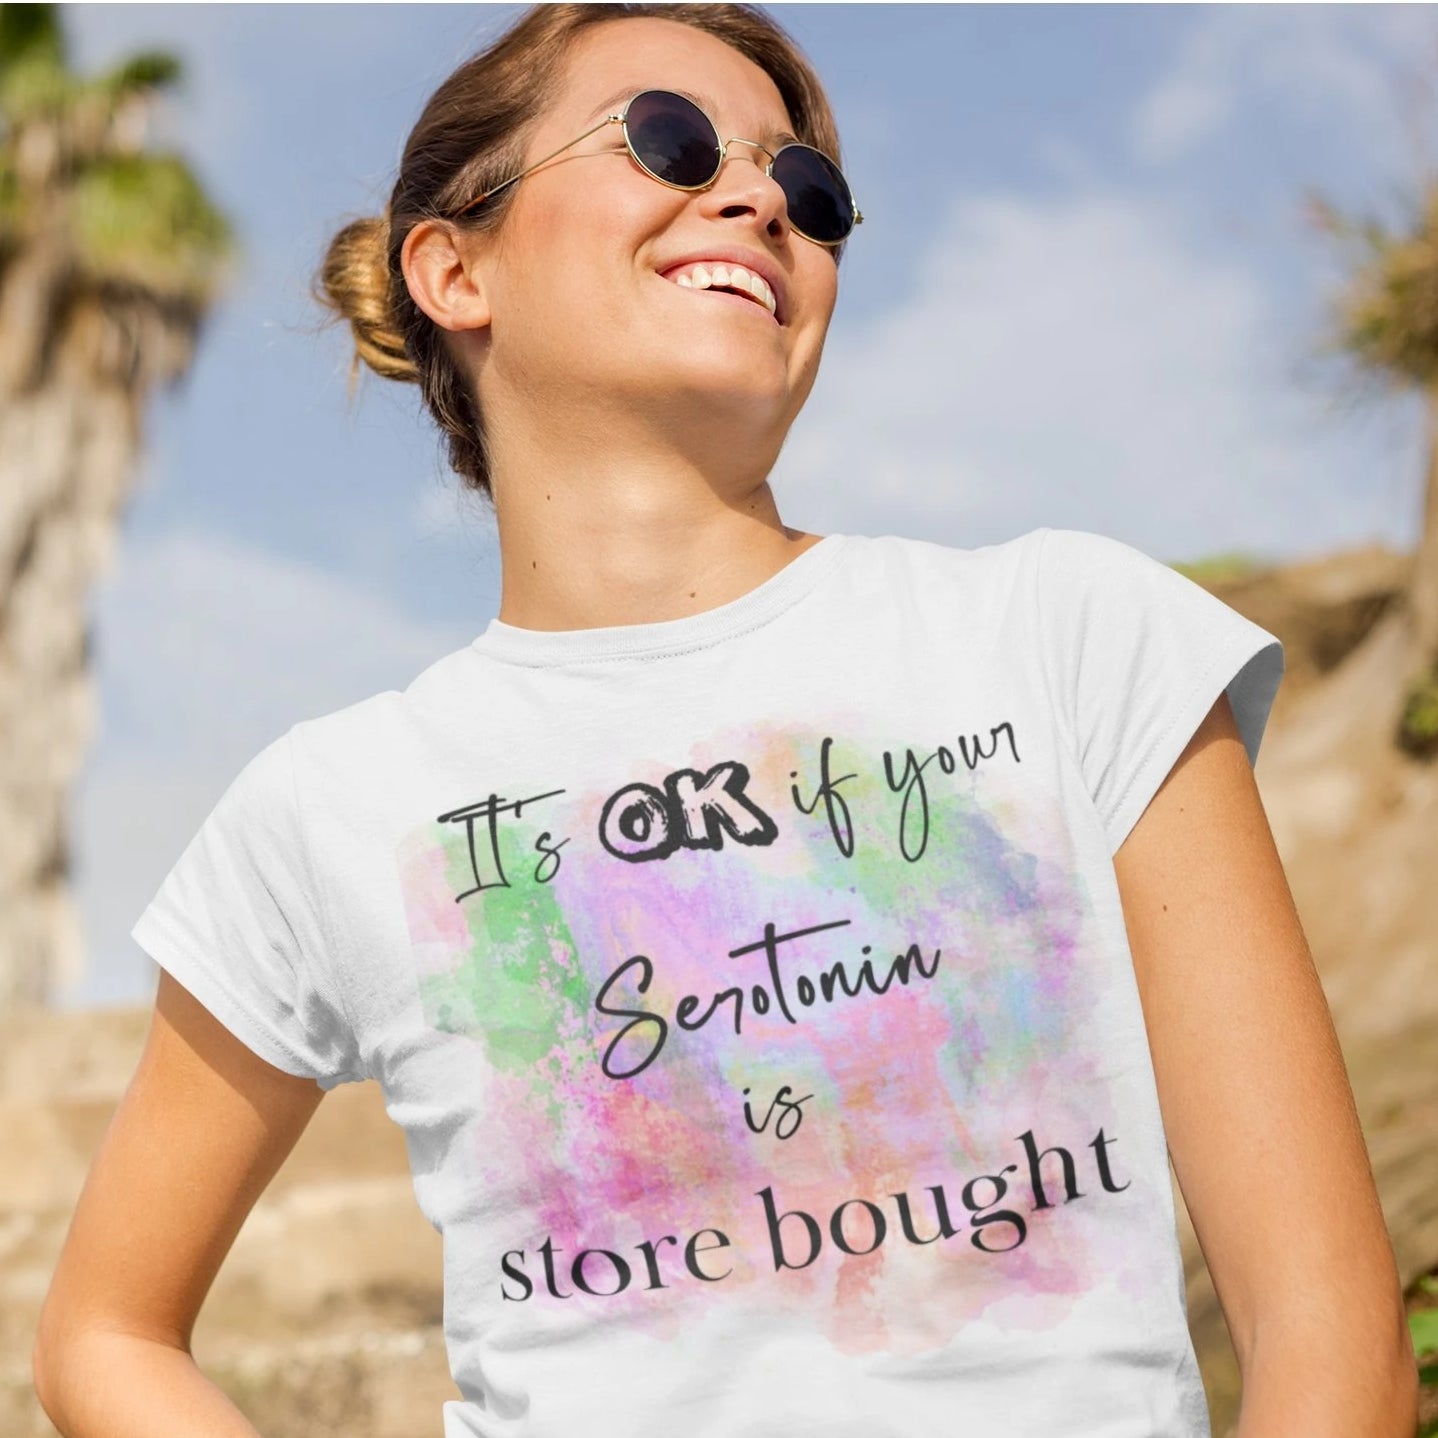 It's OK if Your Serotonin is Store-Bought: Mental Health Positivity T-shirt – Where Comfort Meets Acceptance!